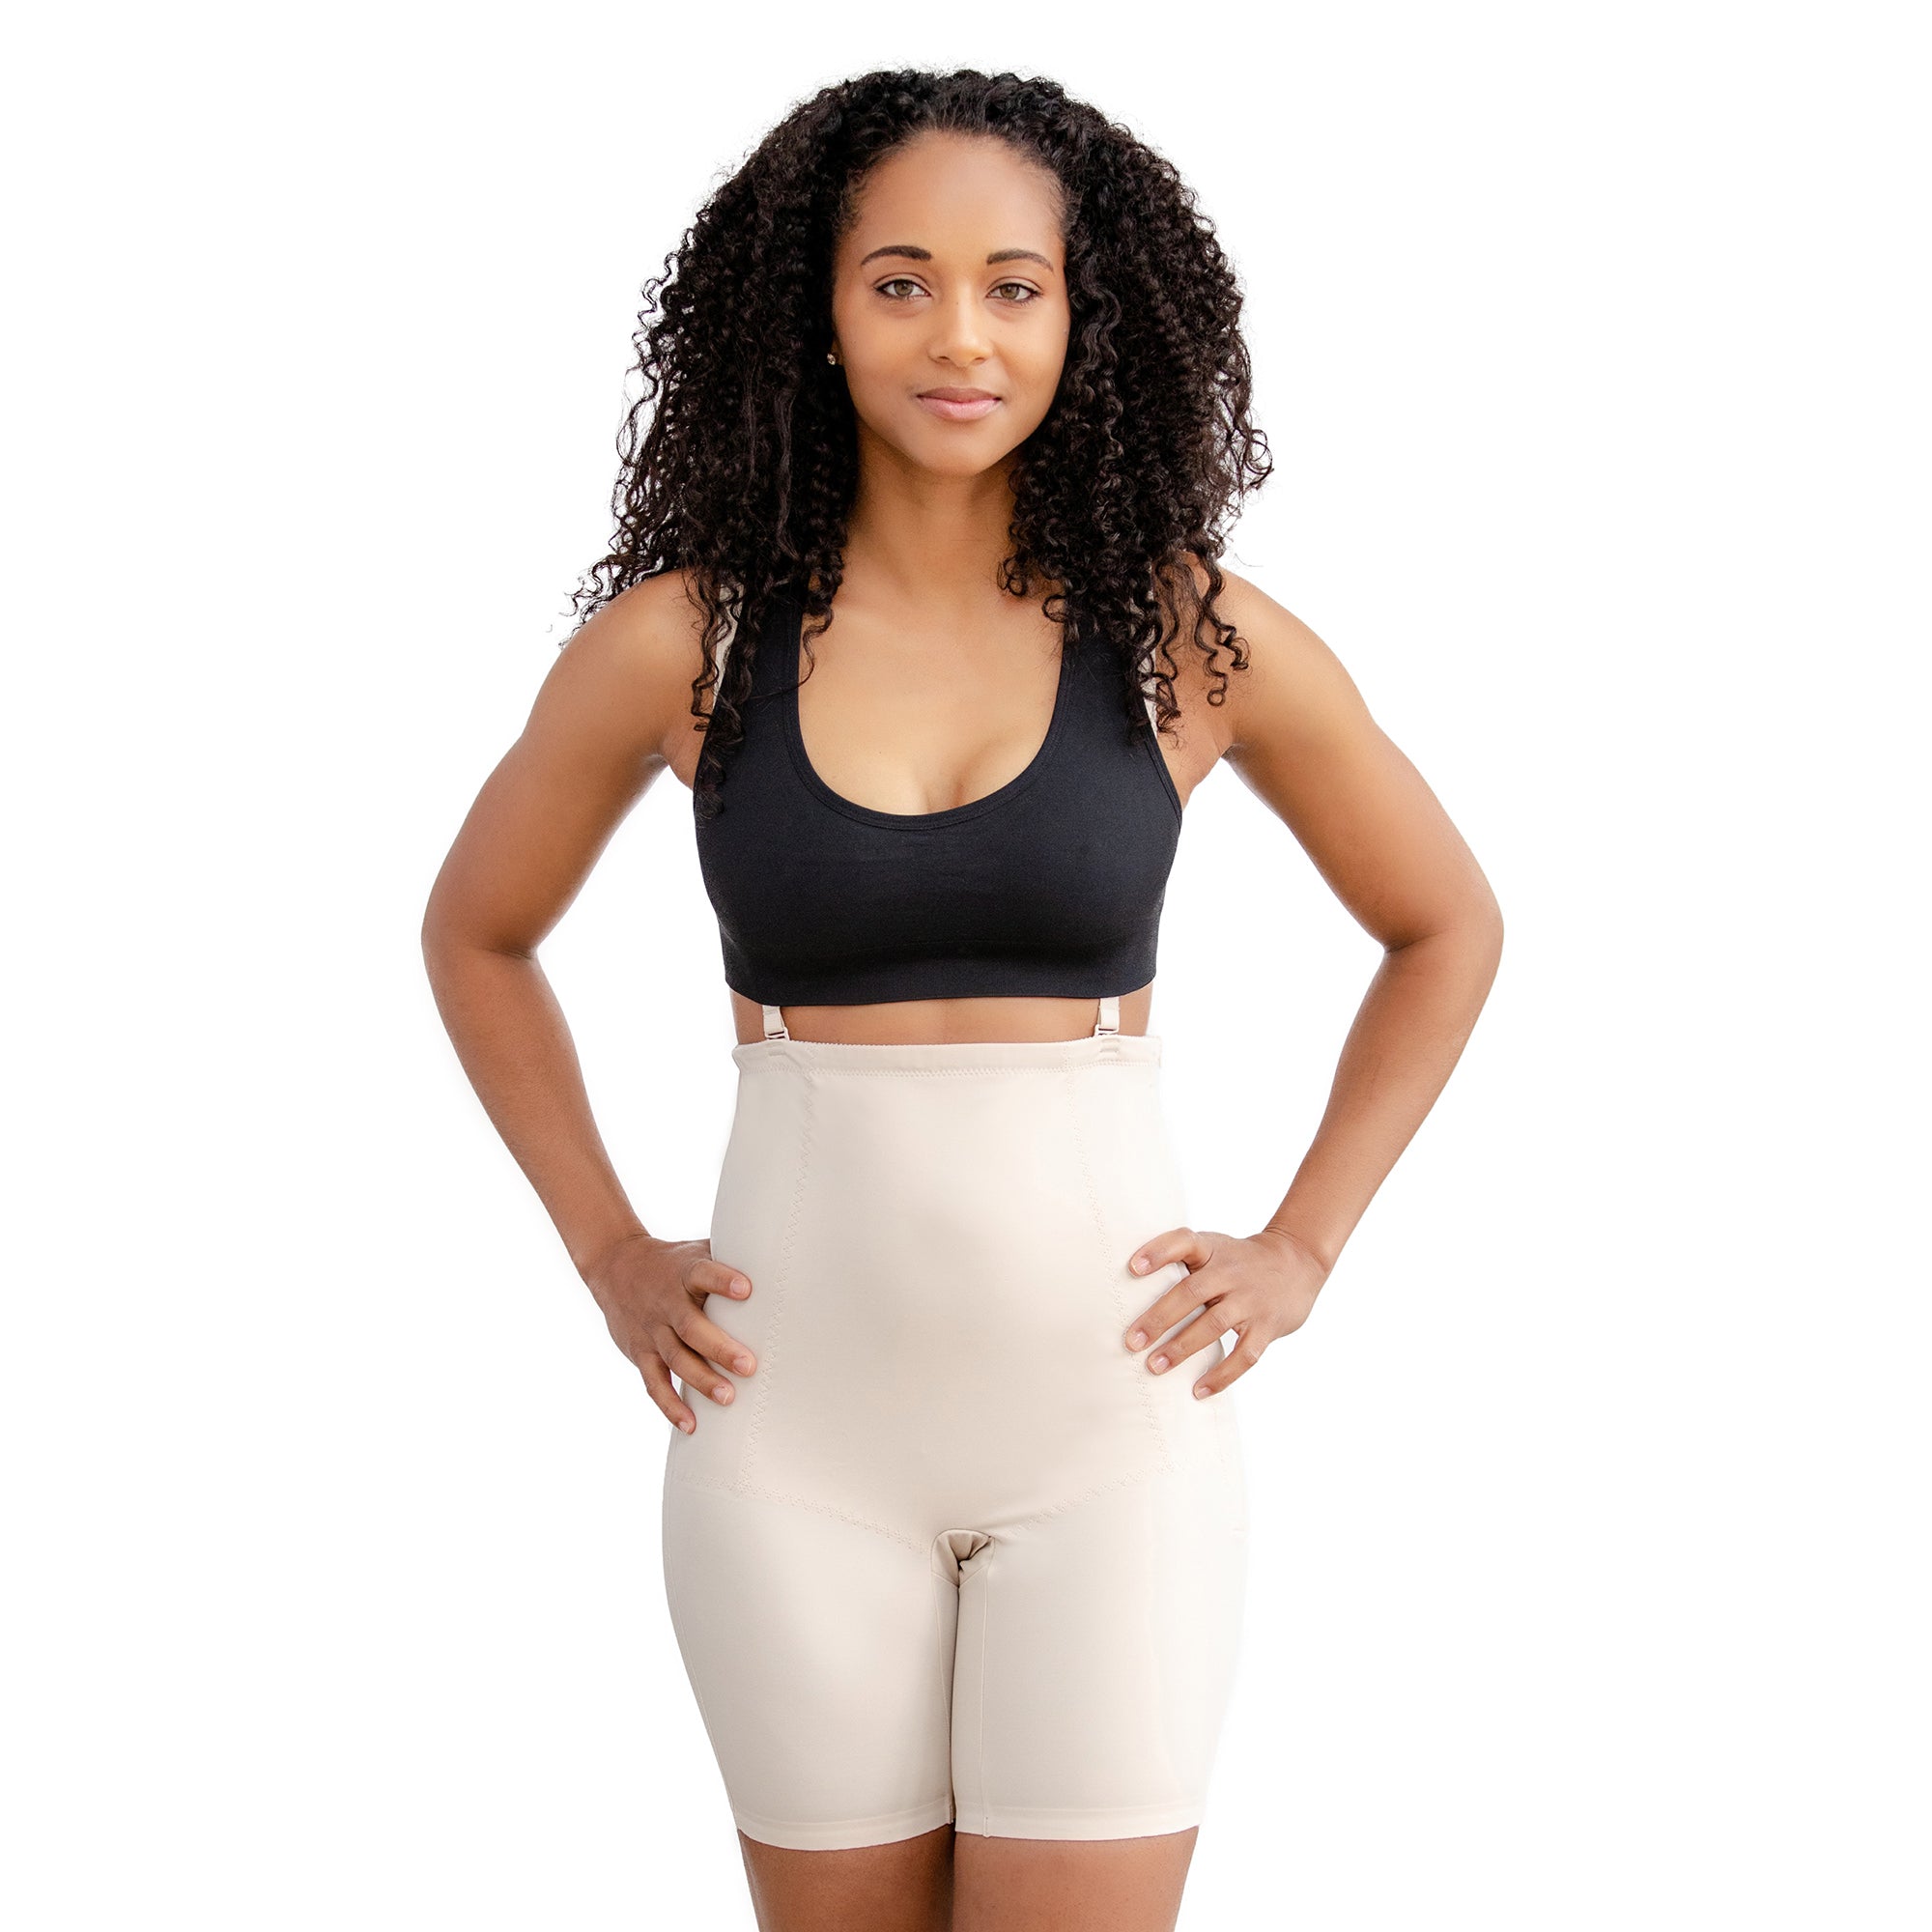 Motif Medical Postpartum Recovery Garment for Natural Birth